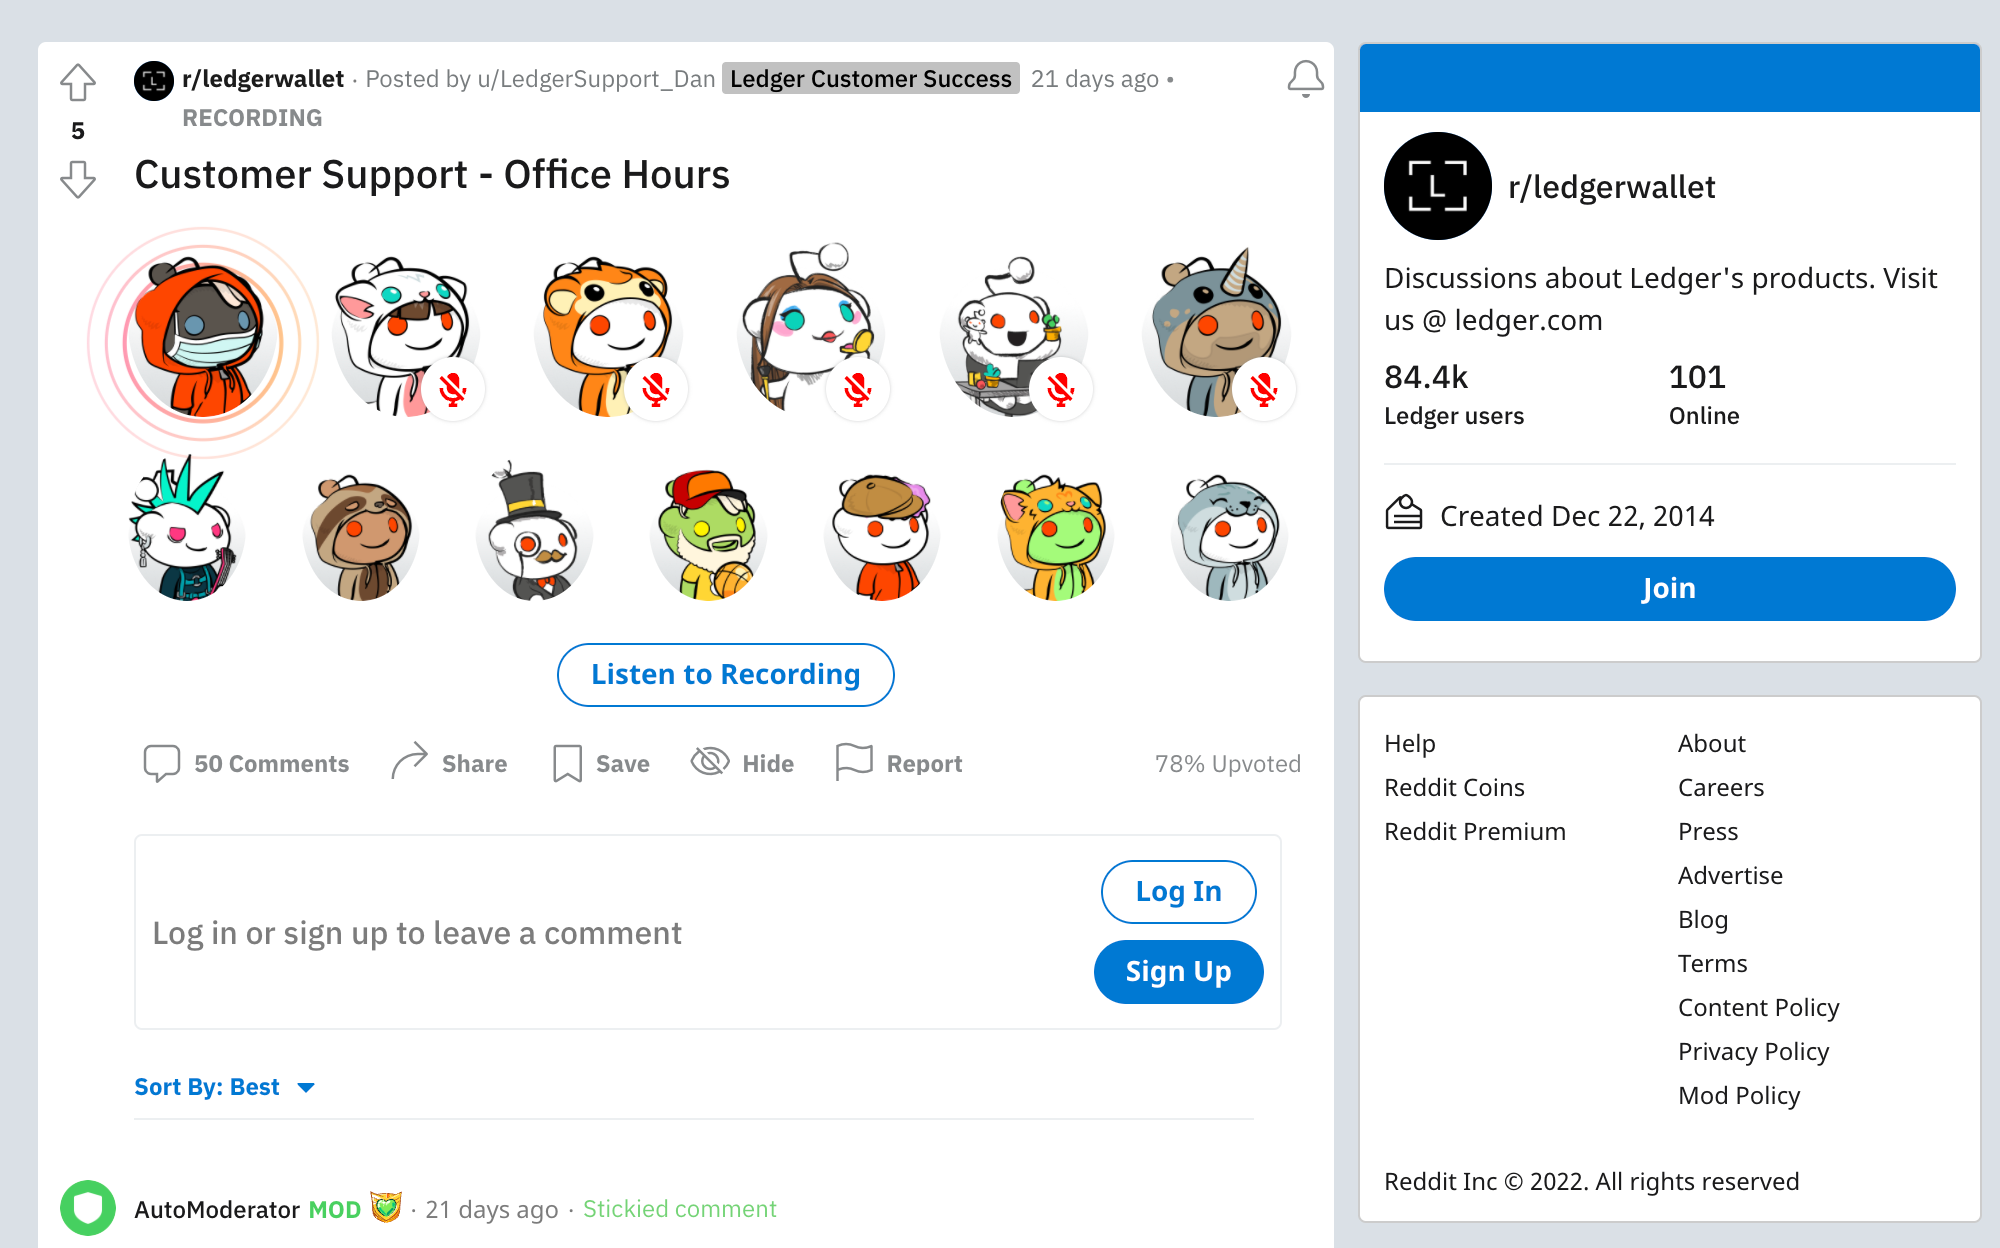 How To Use Reddit For Business In 22